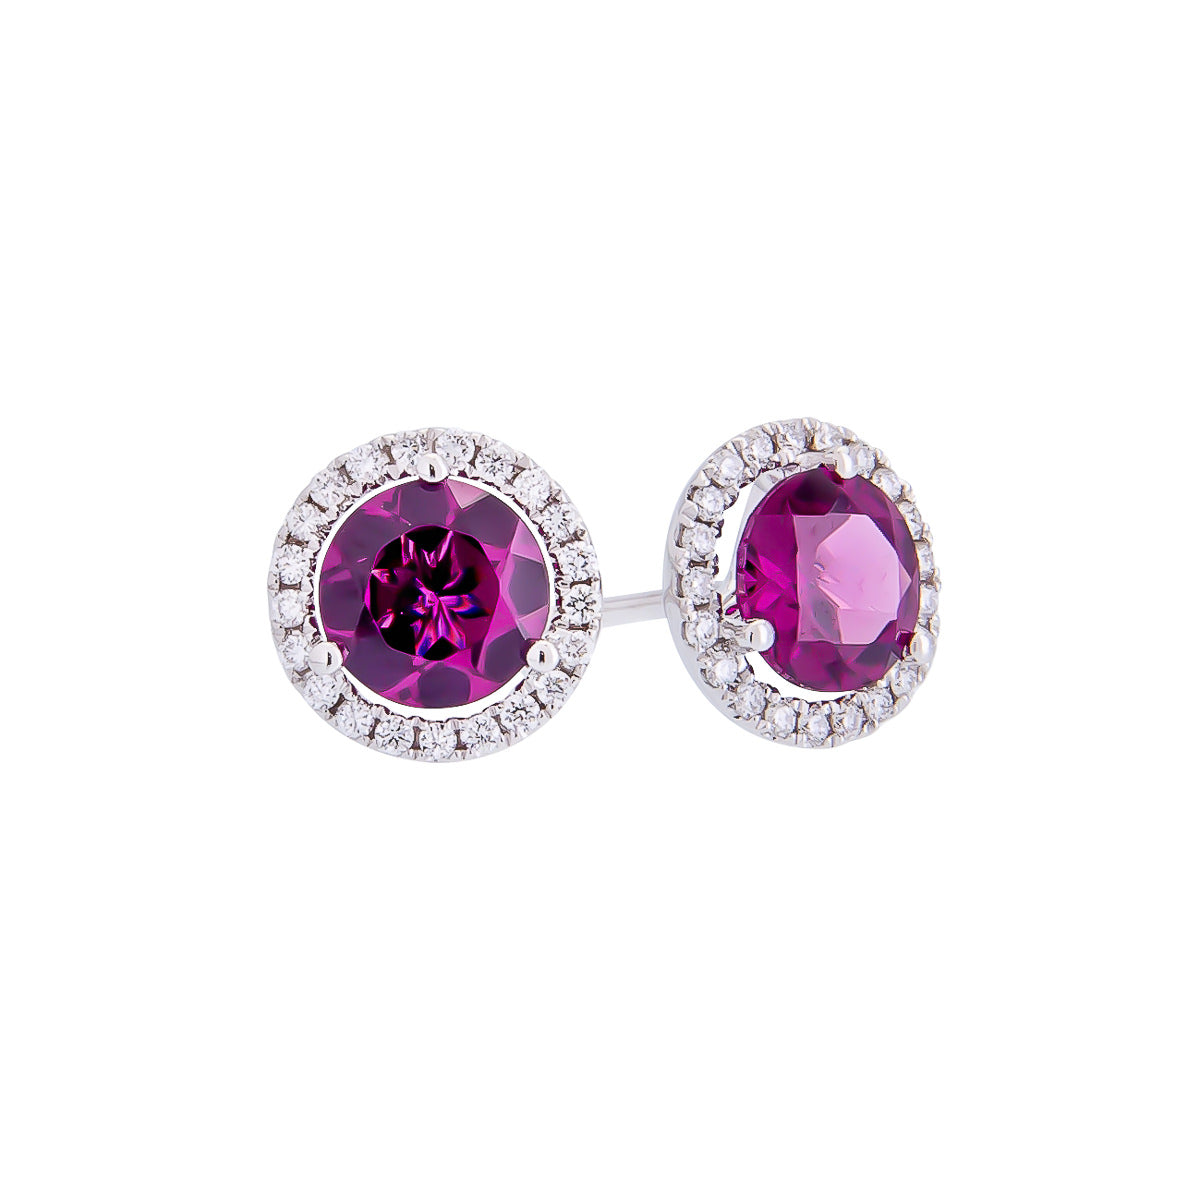 Sabel Collection 14K White Gold Round Rhodolite Garnet and Diamond Halo Stud Earrings